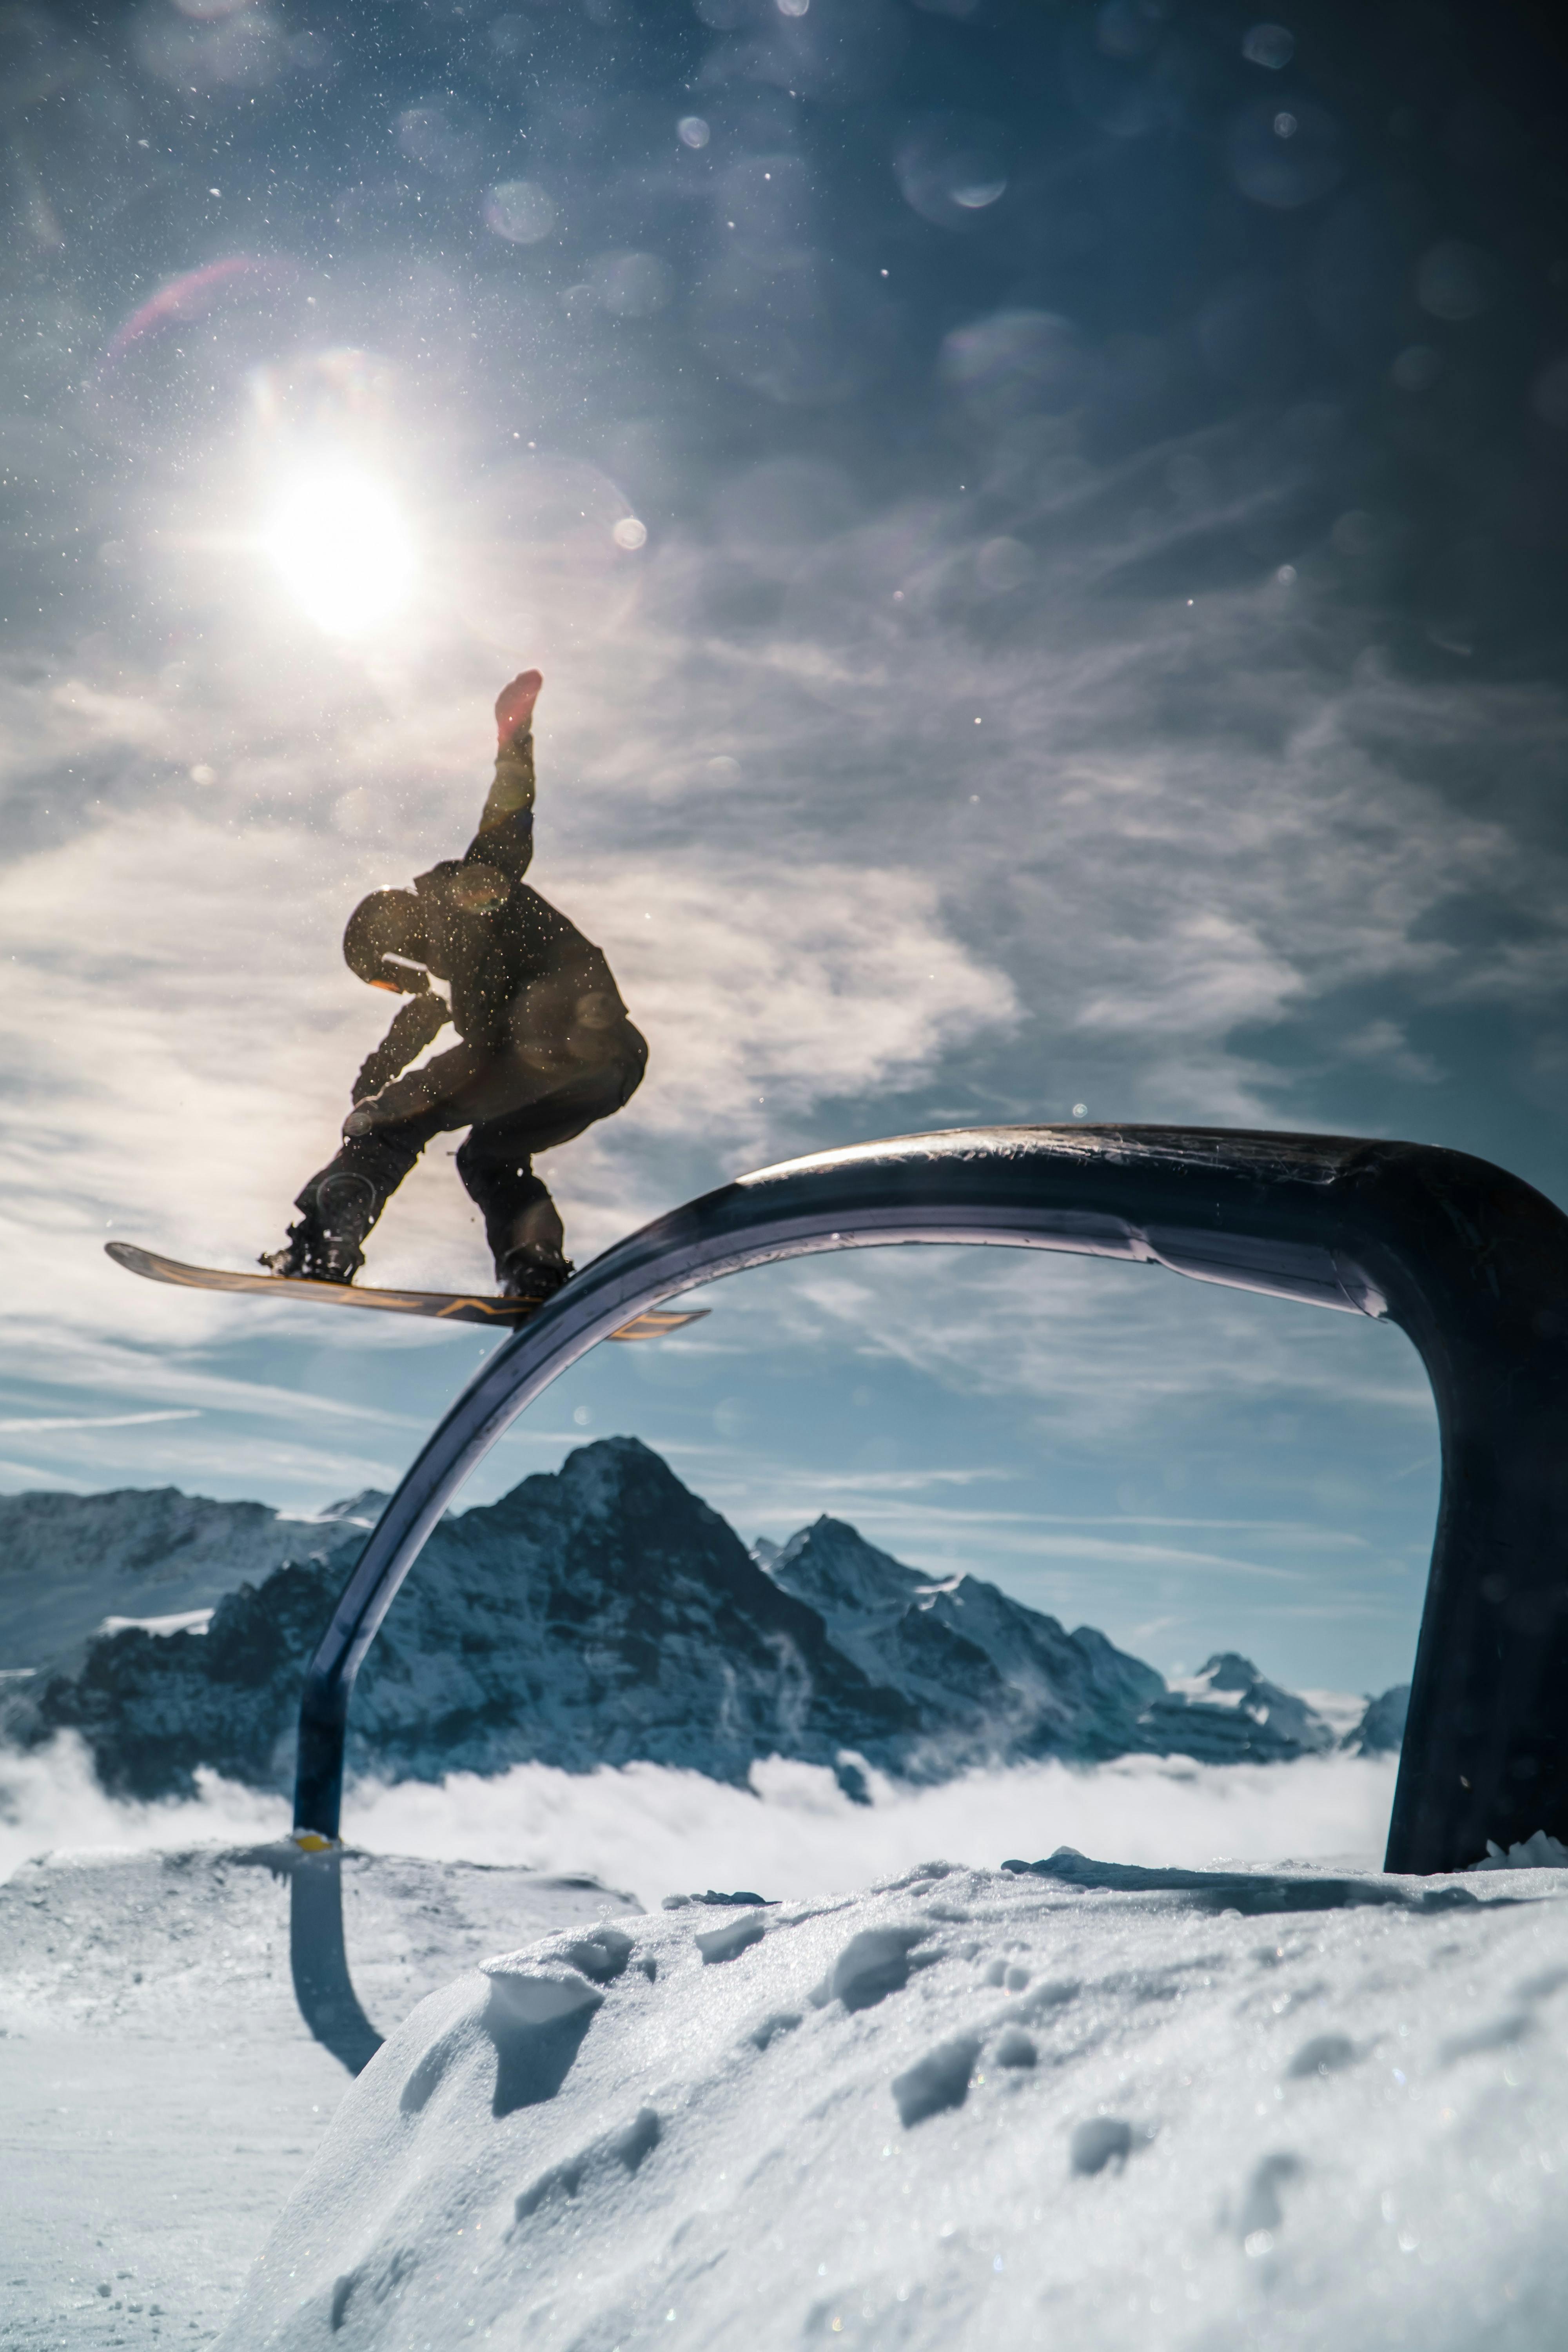 Snowboarder slides across rail sideways on his board. There are mountains in the background and a blue sky.